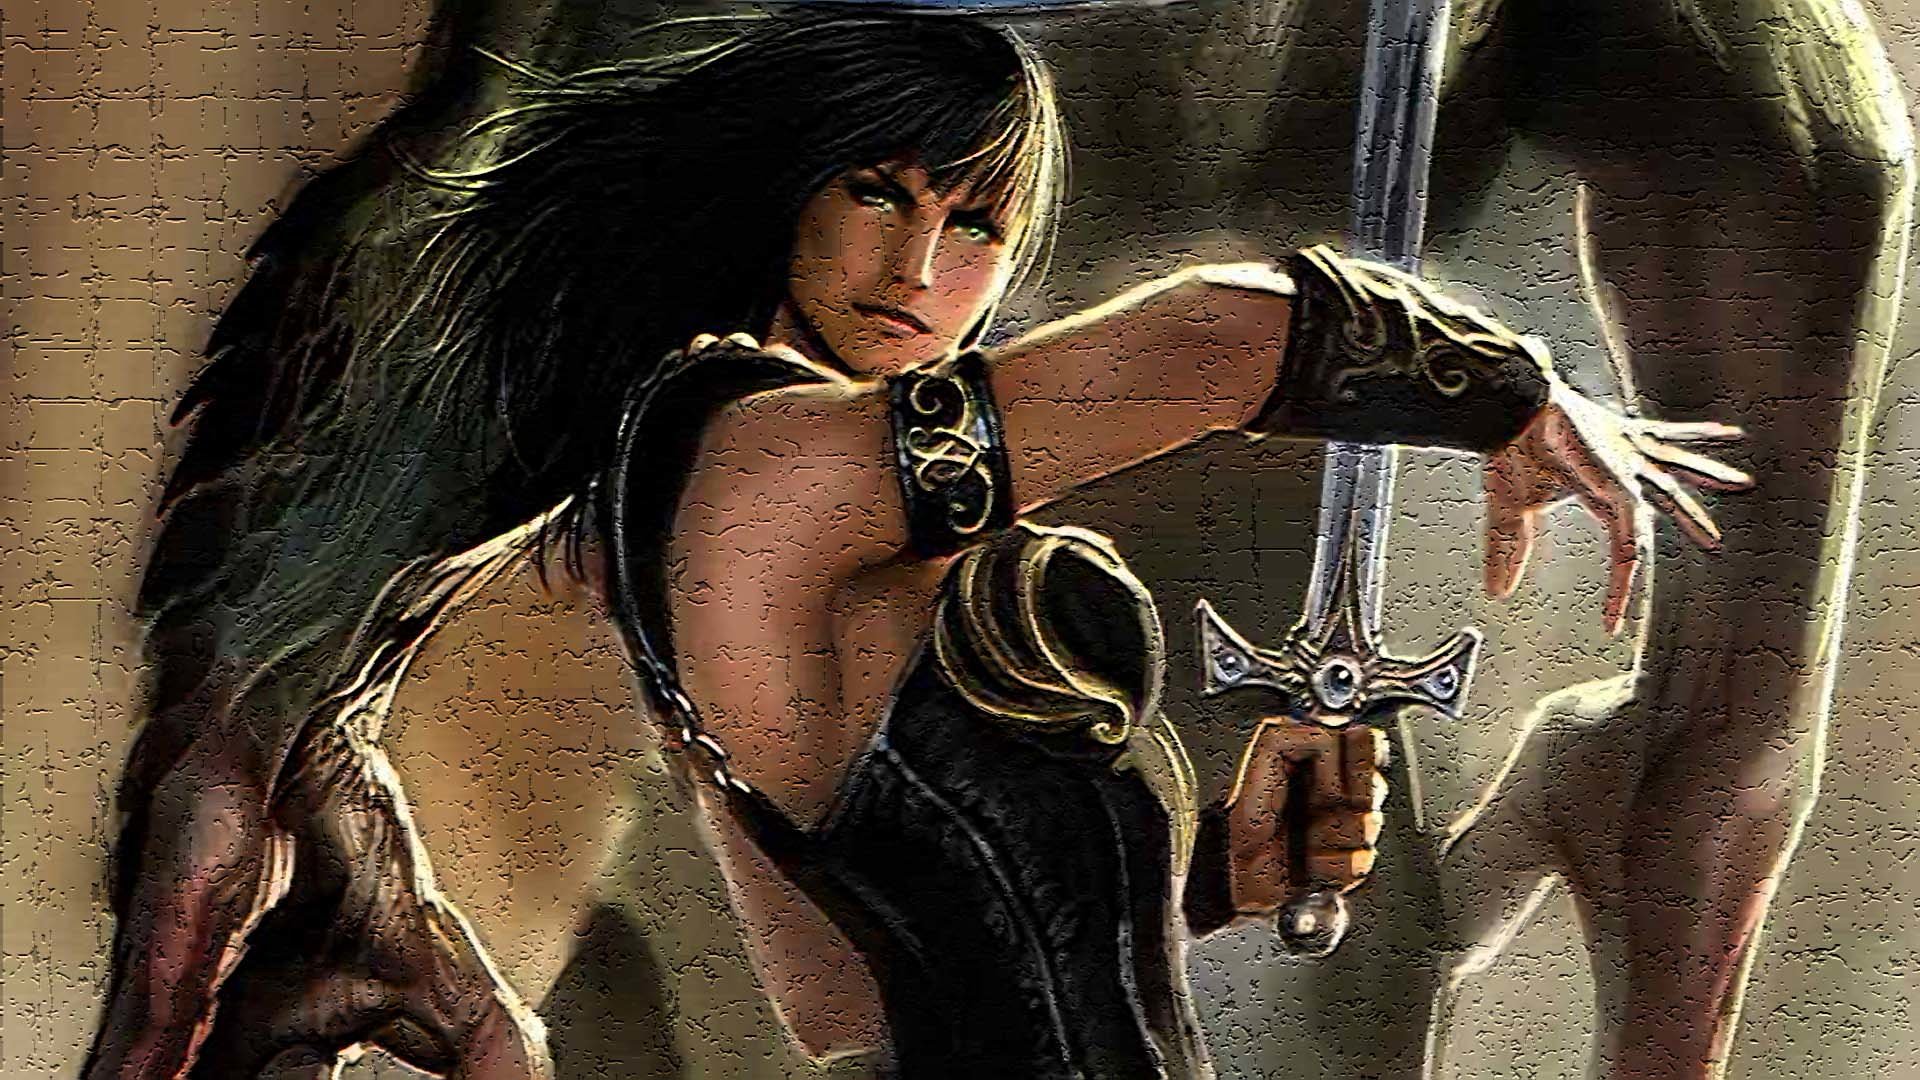 Xena Warrior Princess Wallpaper Posted By Christopher Tremblay